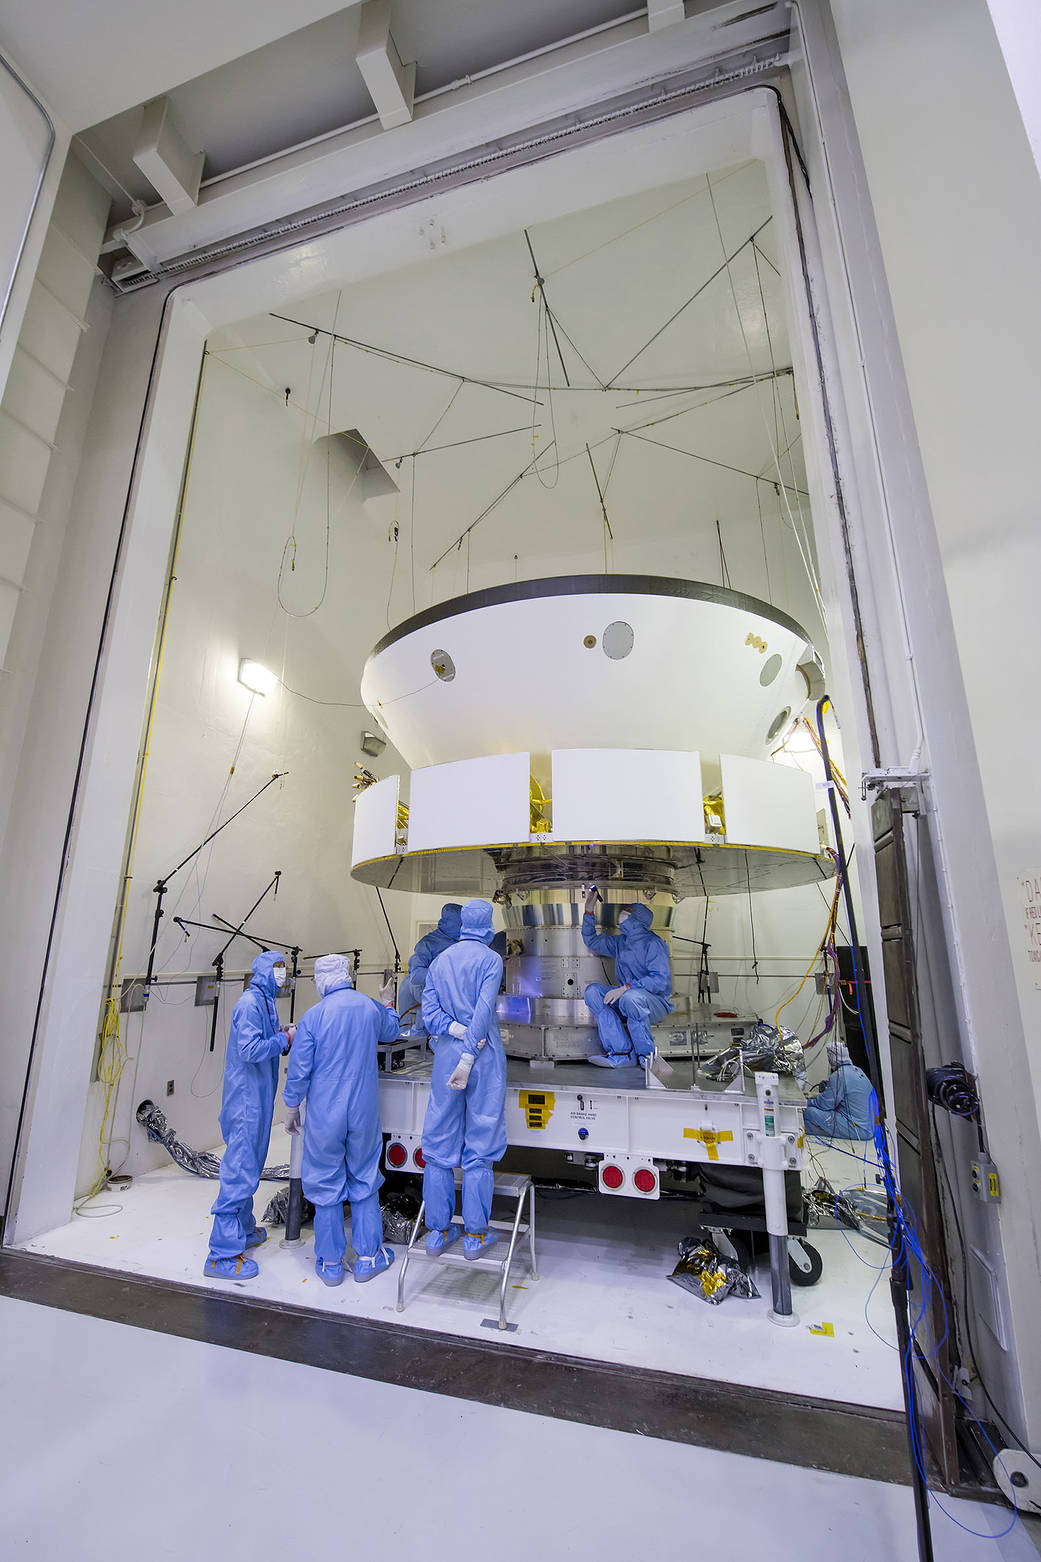 Mars 2020 in the clean room